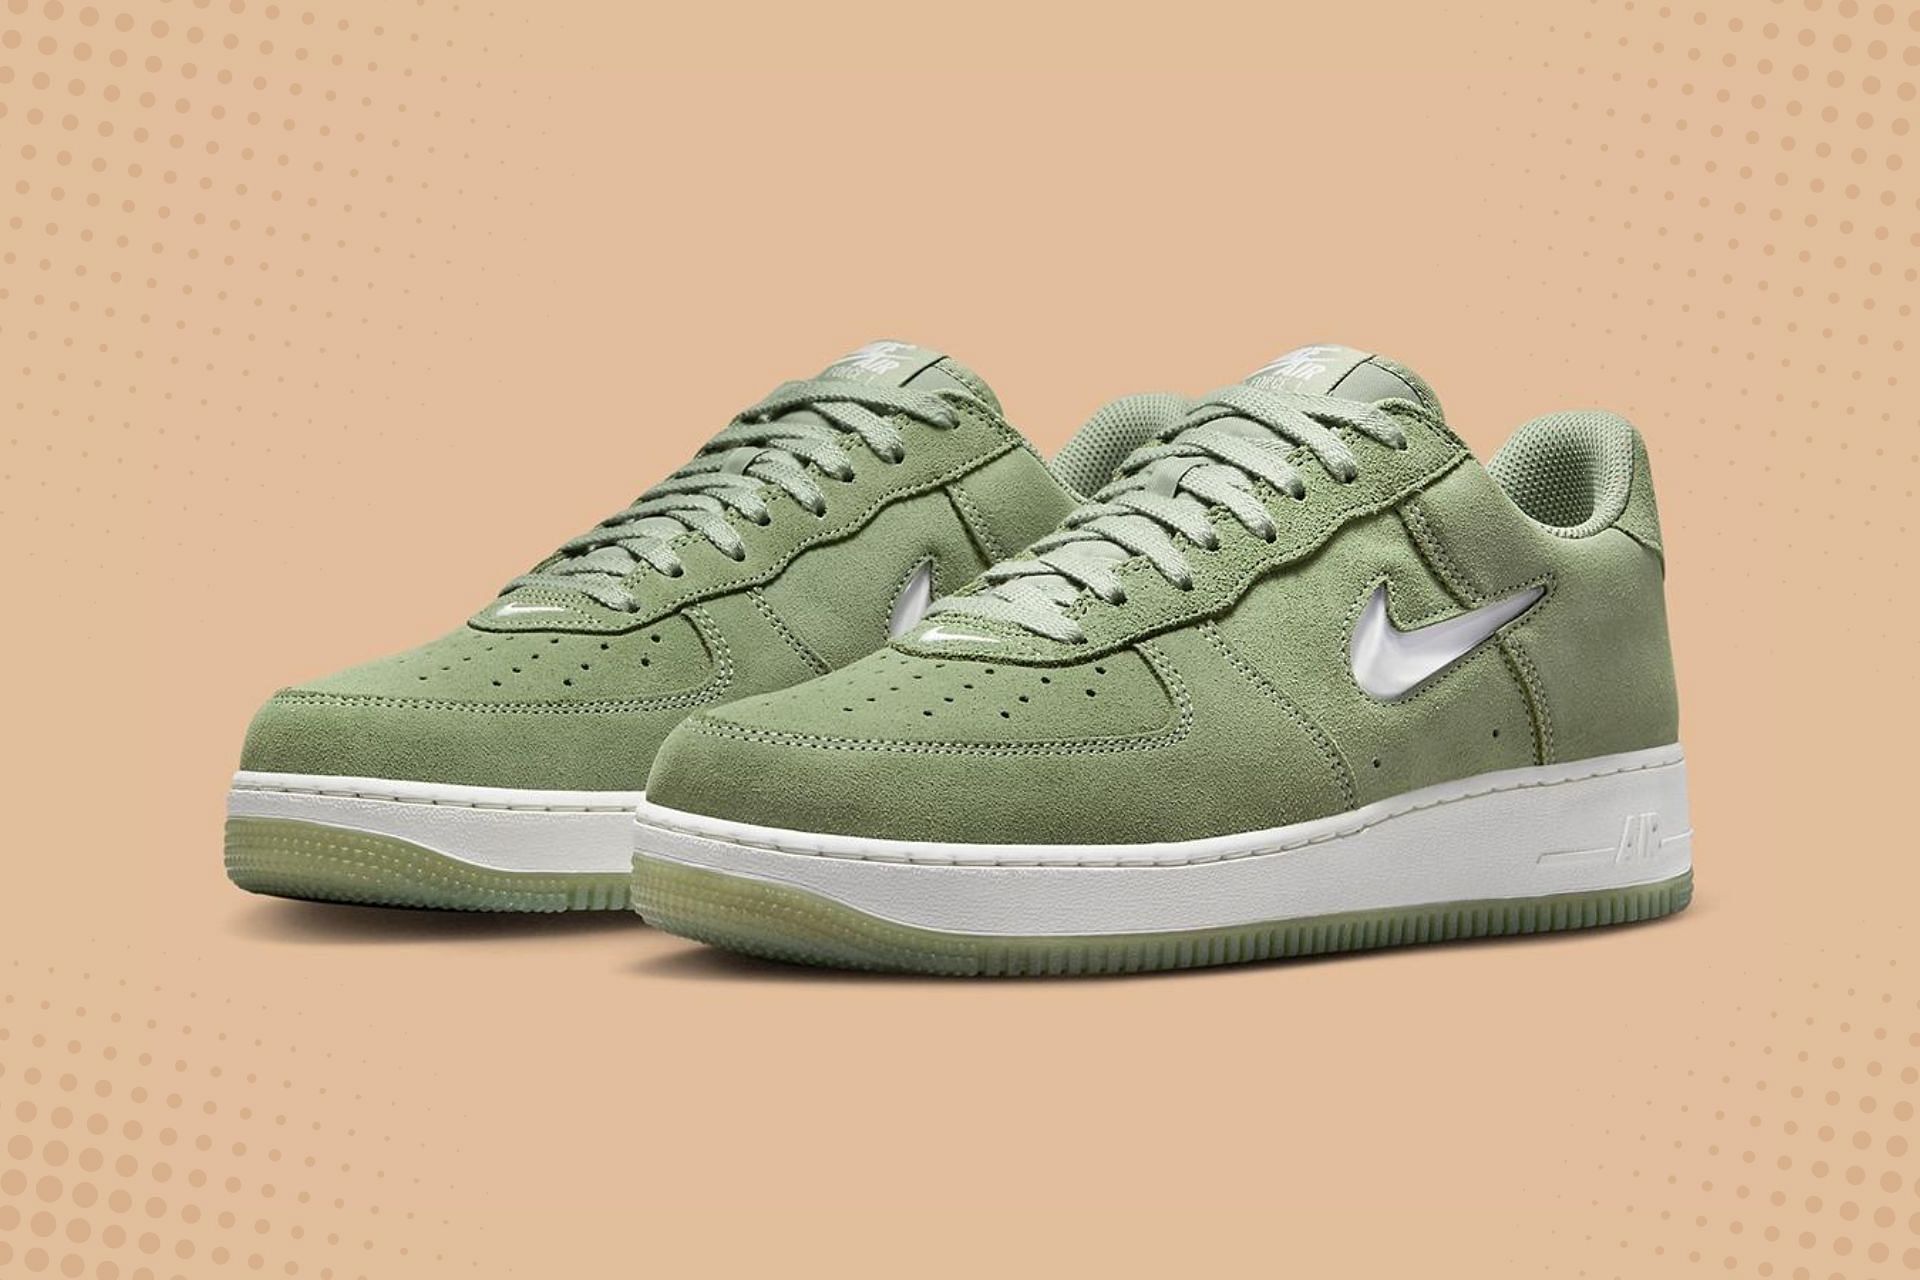 Olive green AF1s just in time for fall, lmk what colors you'd like